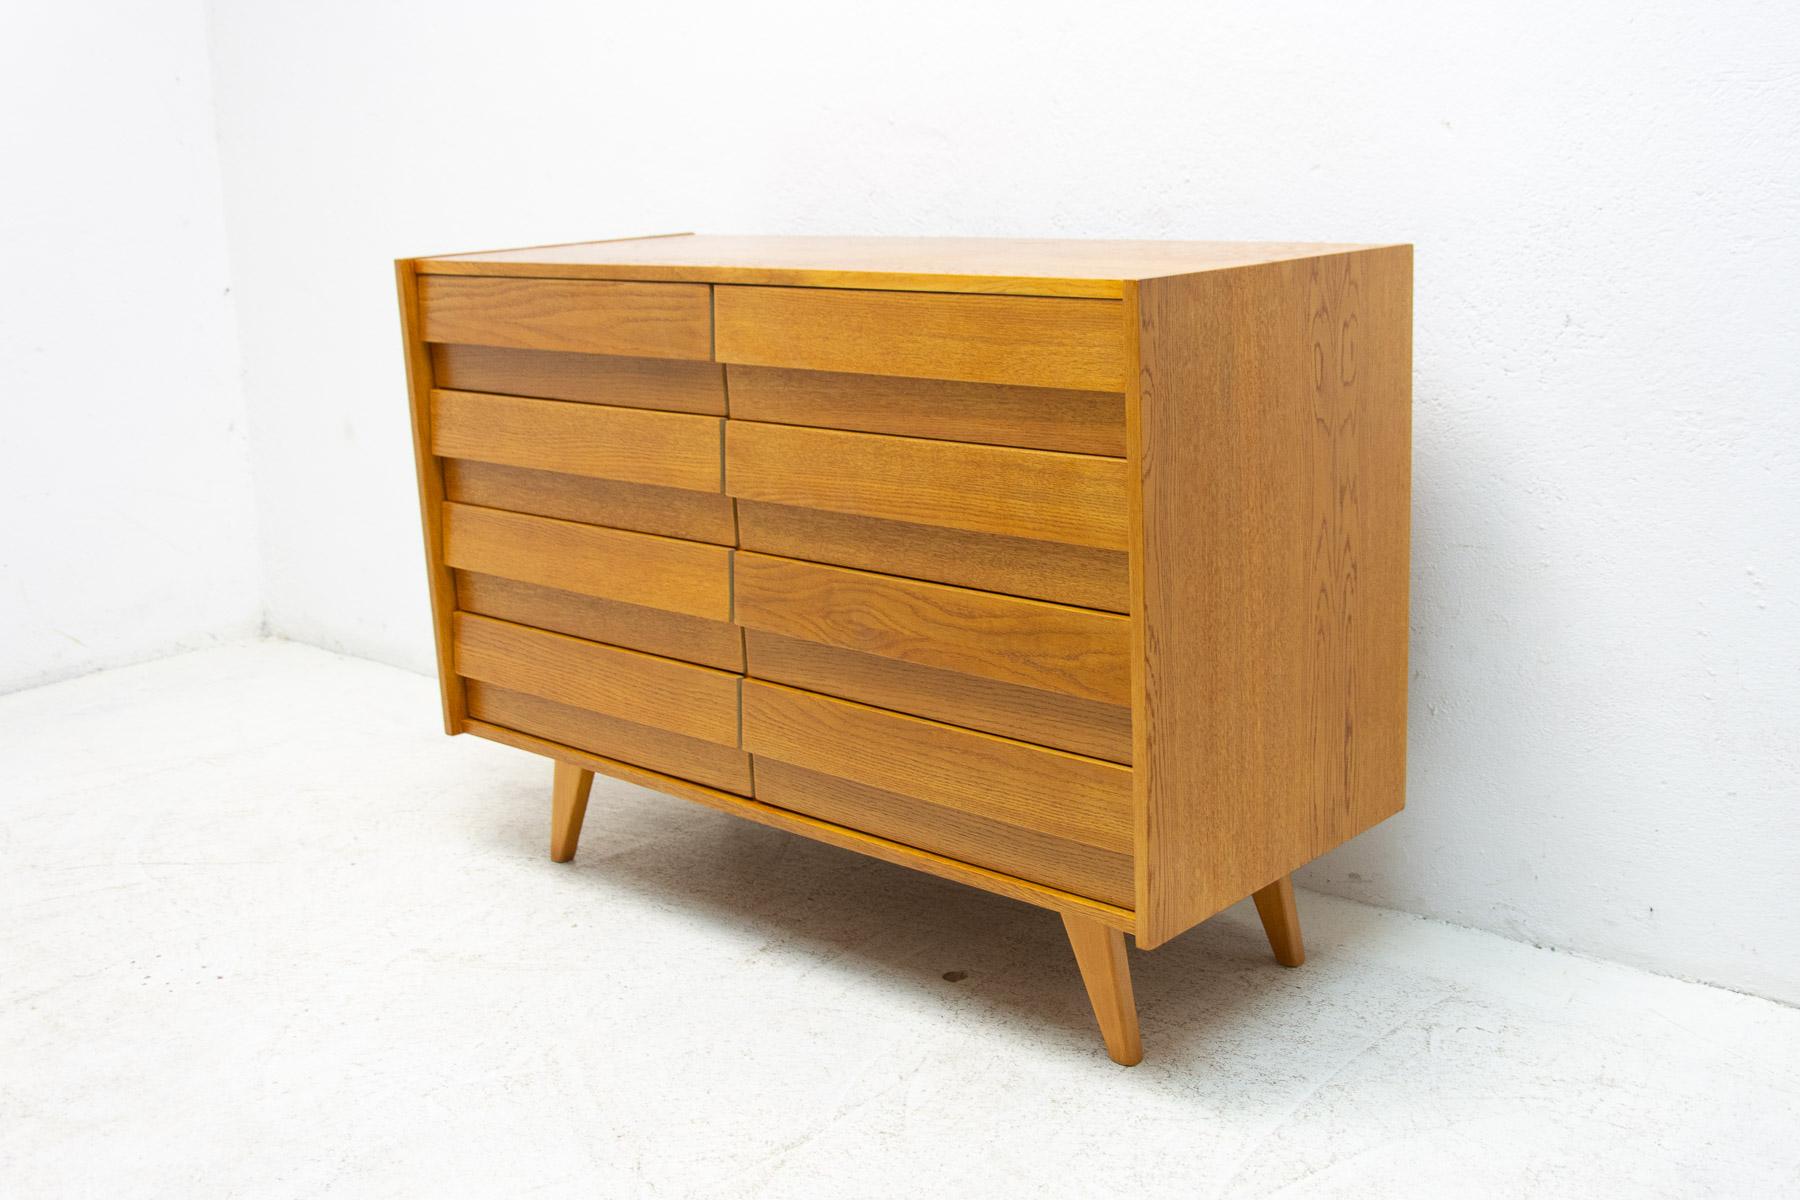 Mid century chest of drawers, model no. U-453, designed by Jiří Jiroutek for Interiér Praha. It was made in the former Czechoslovakia in the 1960´s. This model is associated with the world-famous EXPO 58 in Brussels. It´s made of oak wood and and